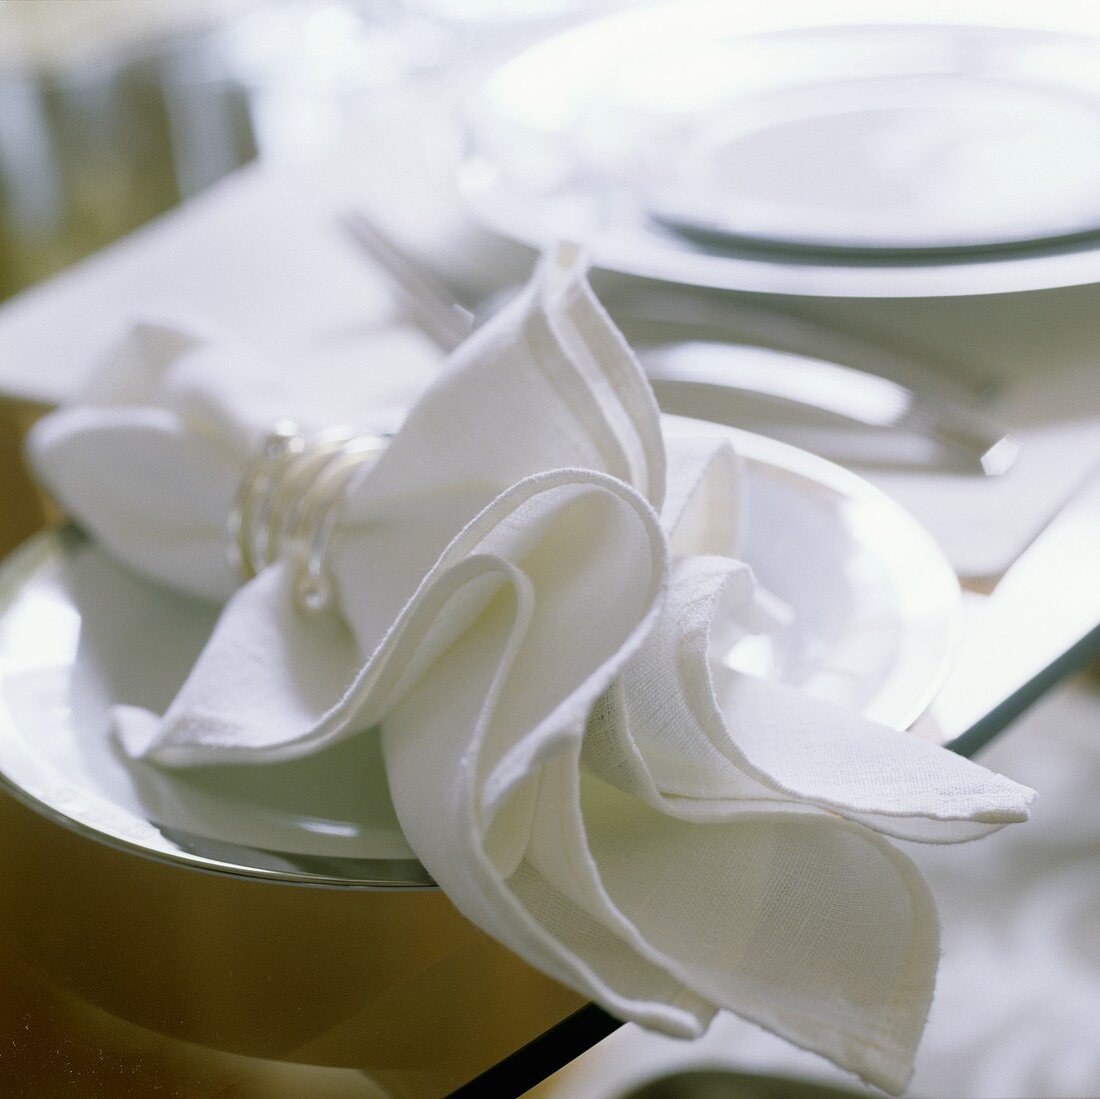 White napkins with rings on a white plate